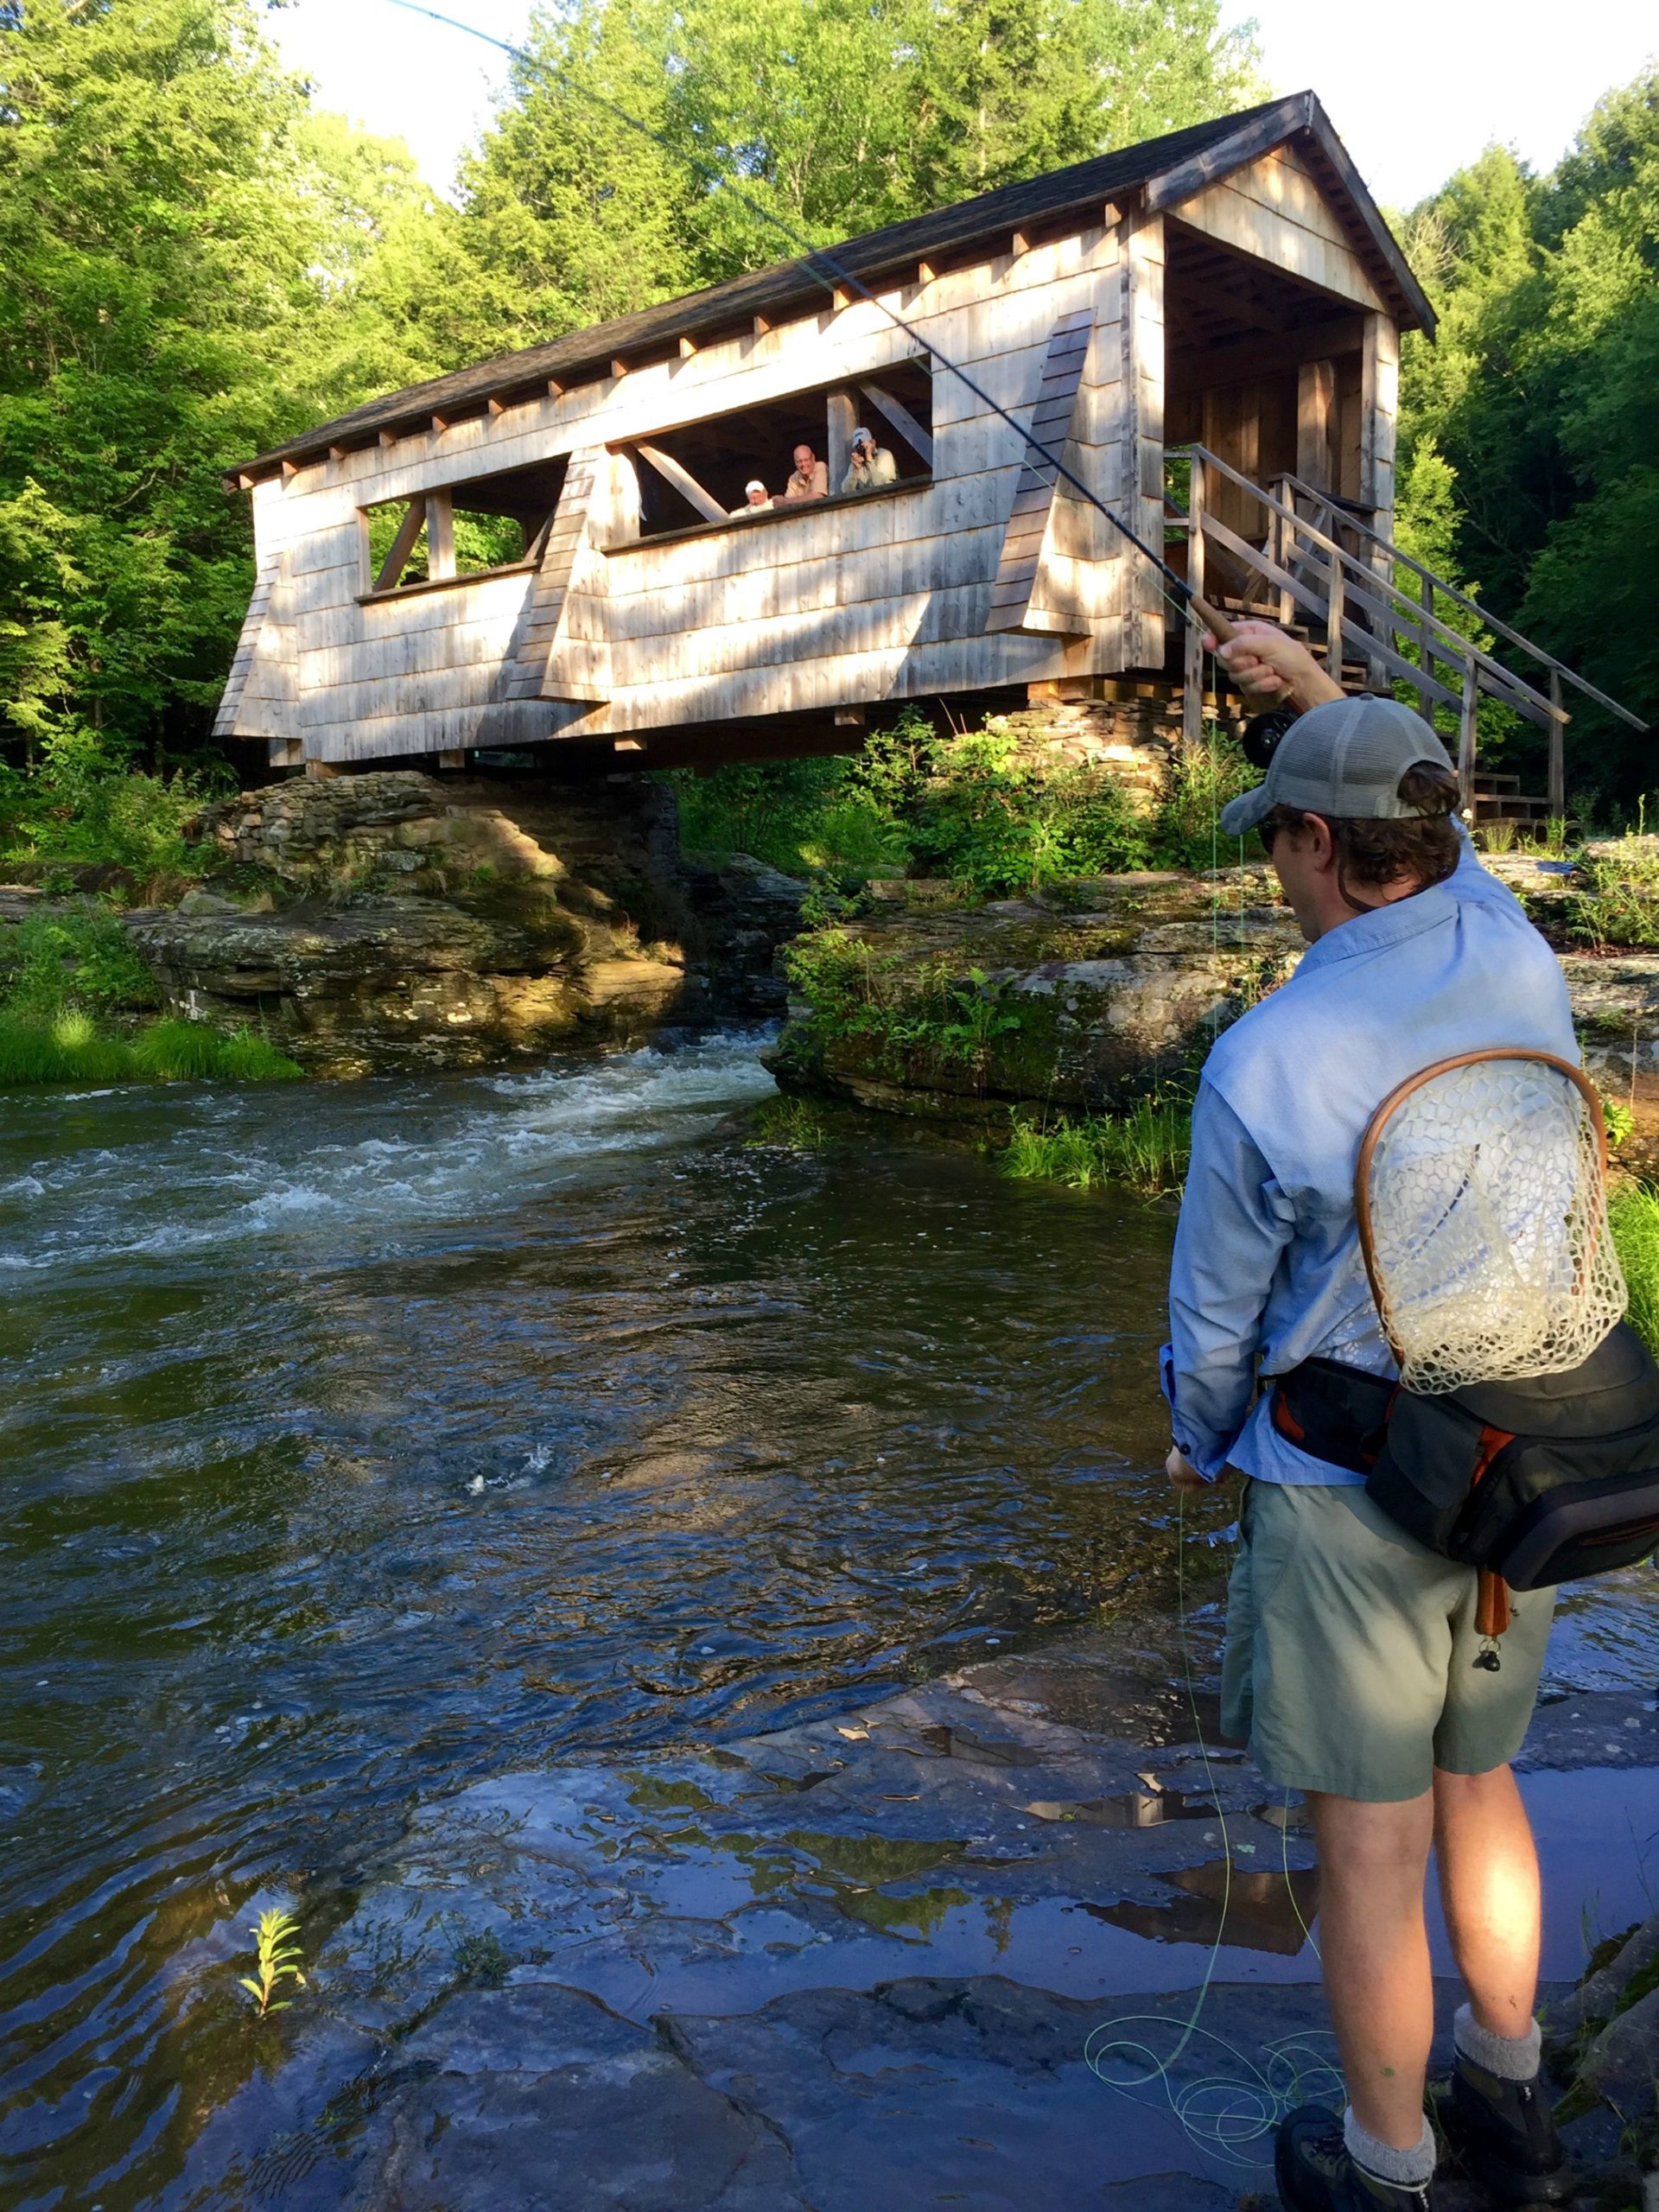 Join the Anglers' Circle - American Museum Of Fly Fishing